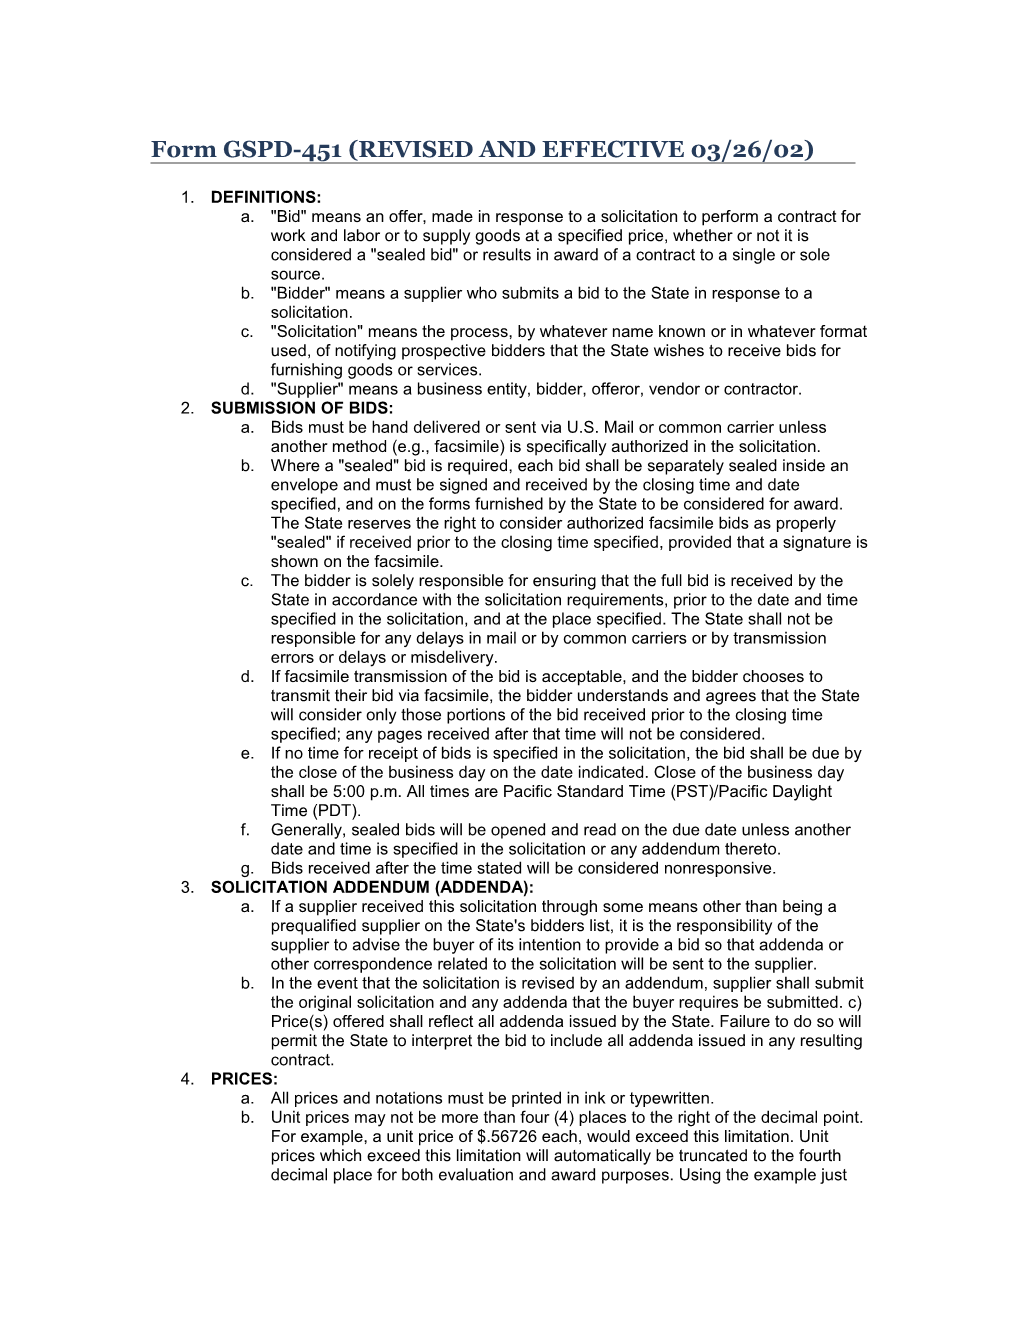 Form GSPD-451 (REVISED and EFFECTIVE 03/26/02)